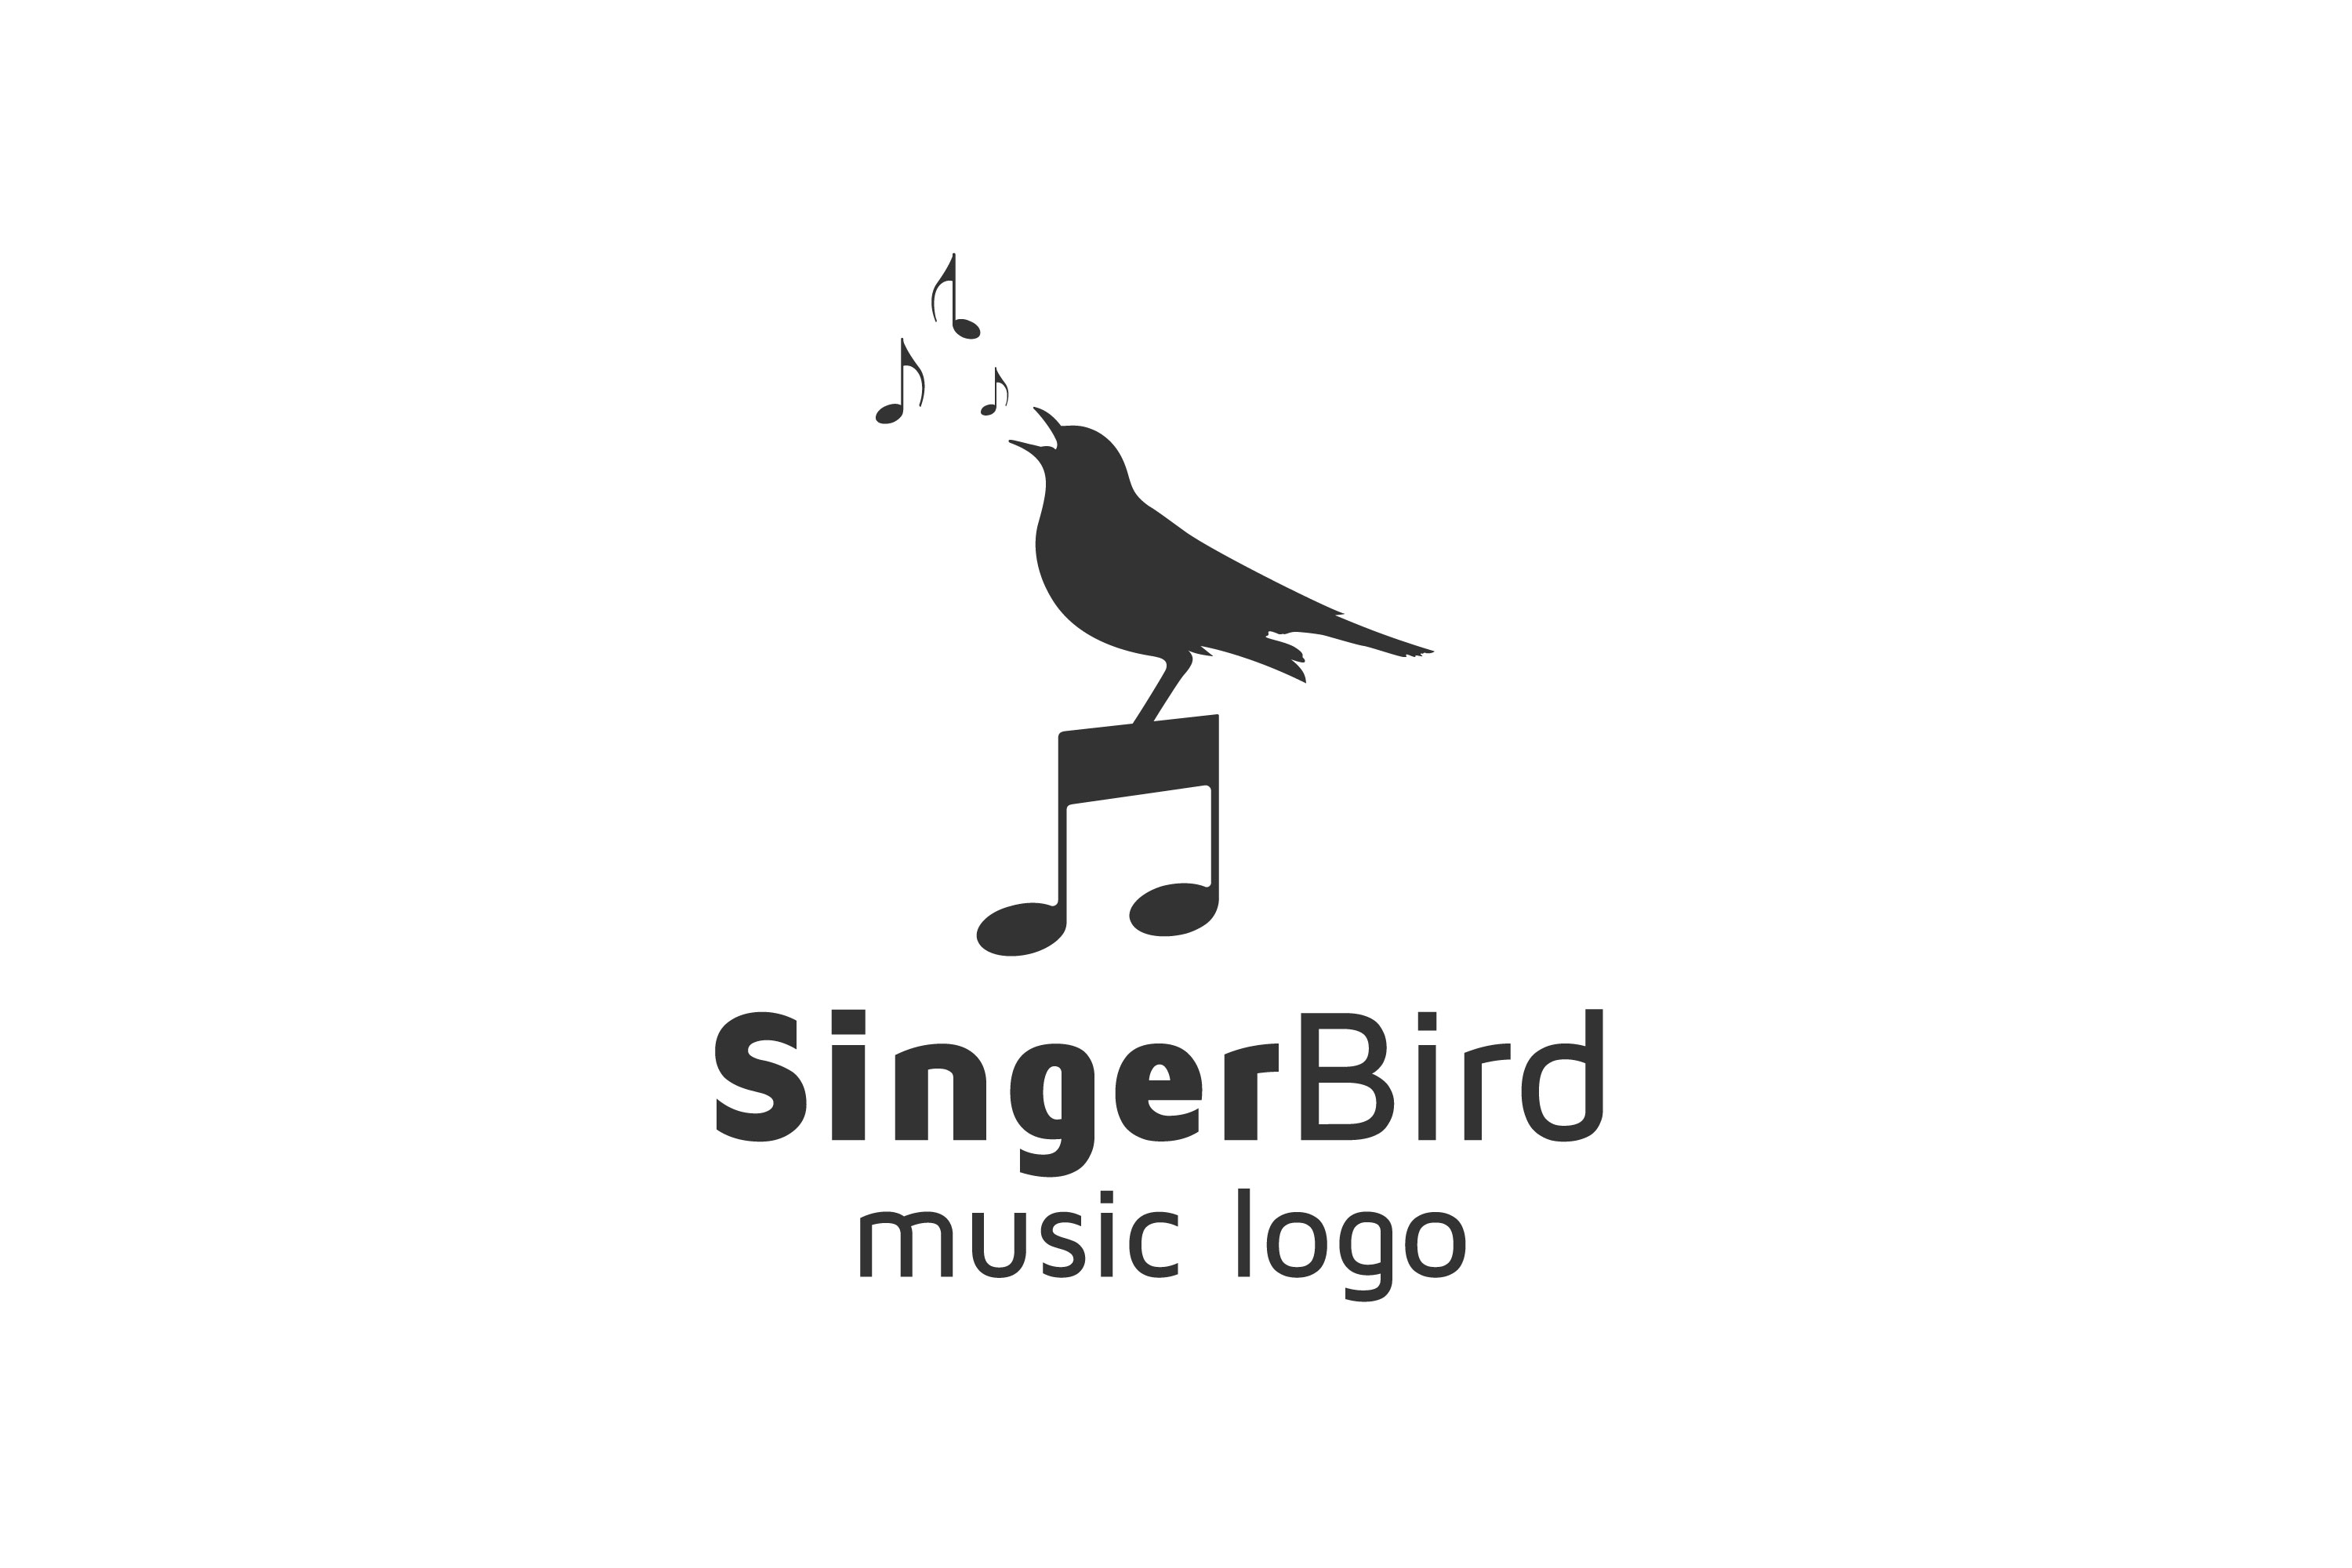 Singing Bird for Music Vocal Logo Design Graphic by Weasley99